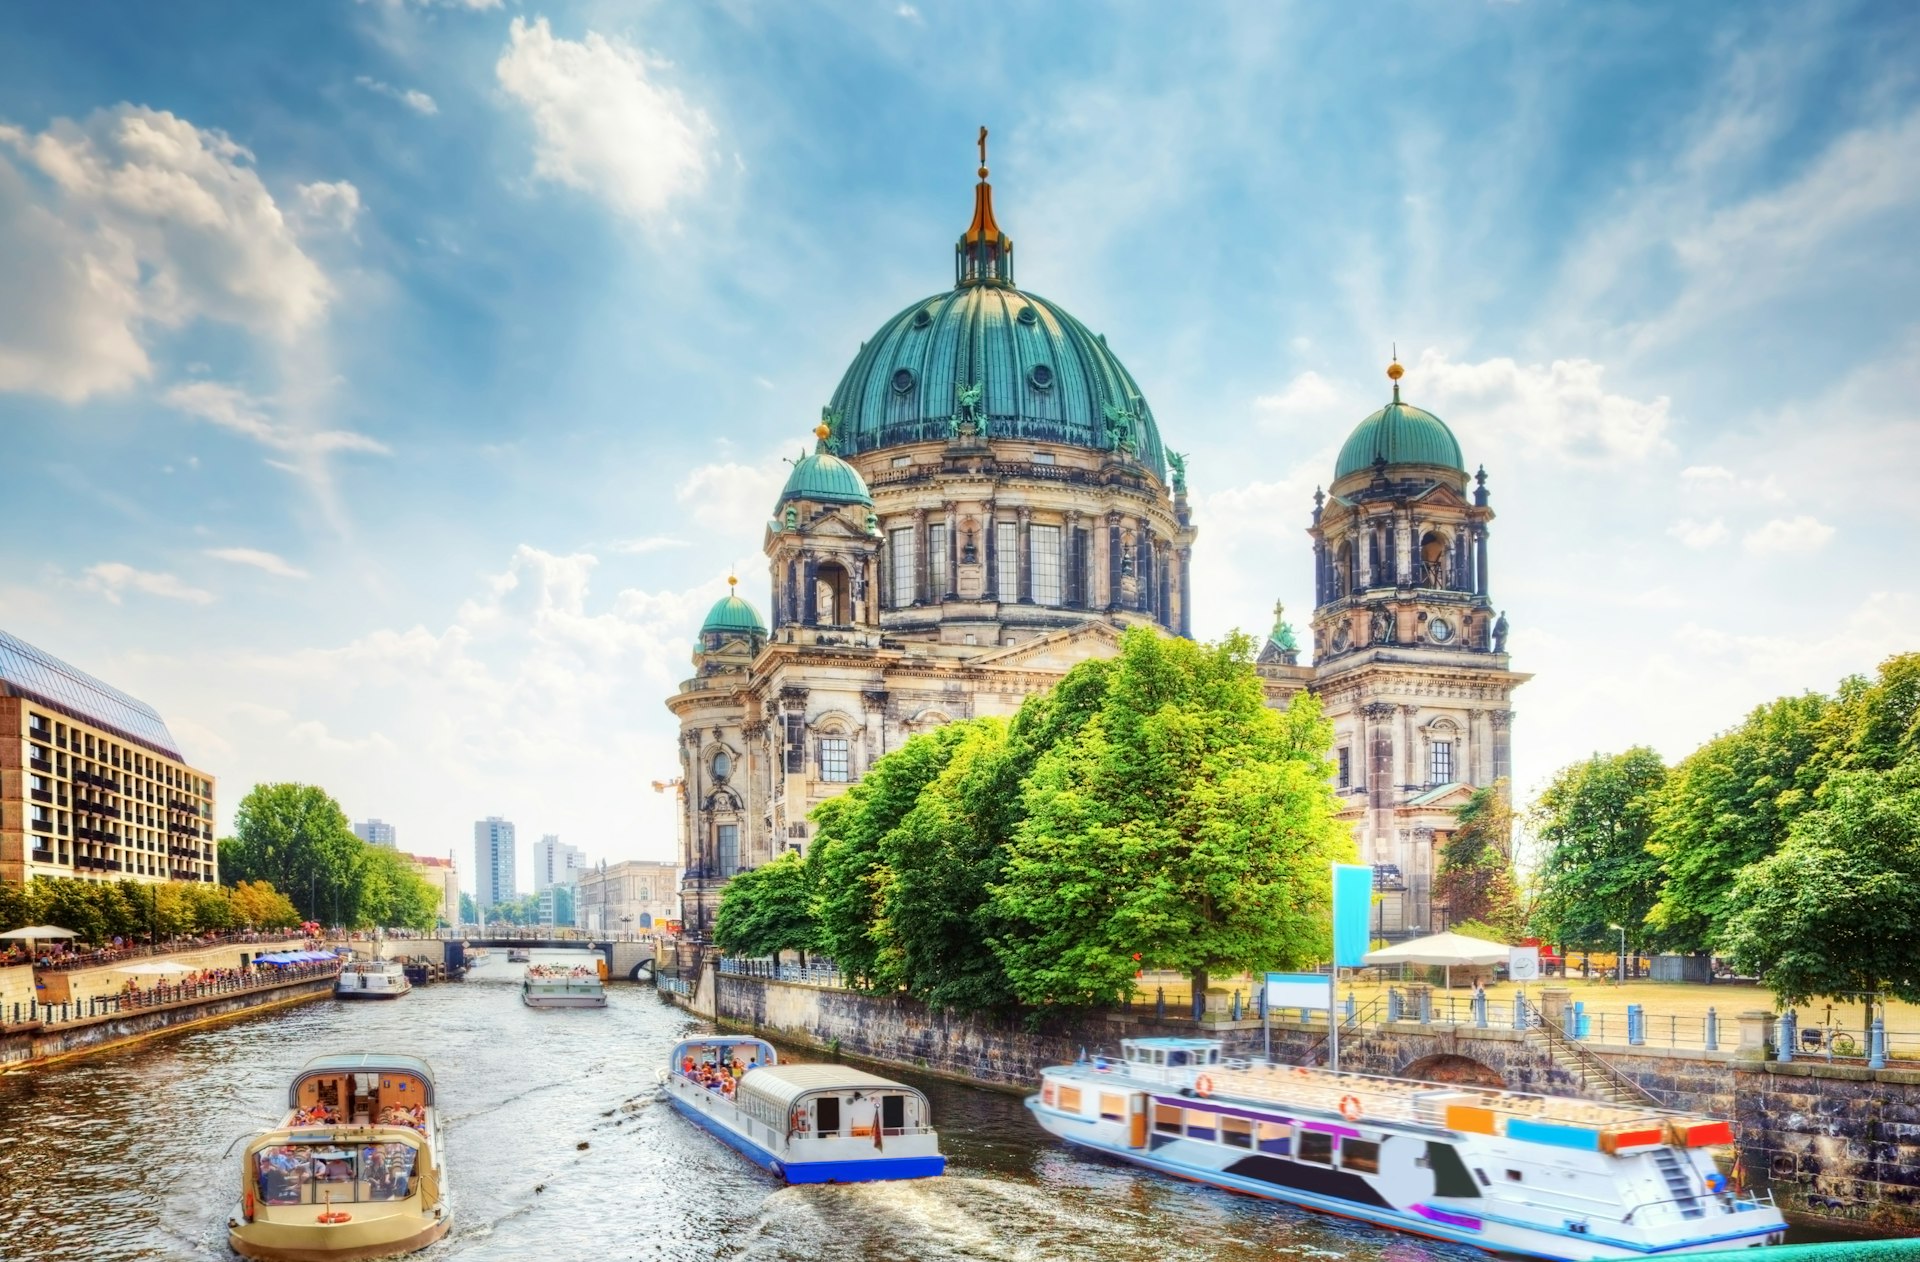 Exterior of the Berlin Cathedral on the Museum Island in Berlin, Germany